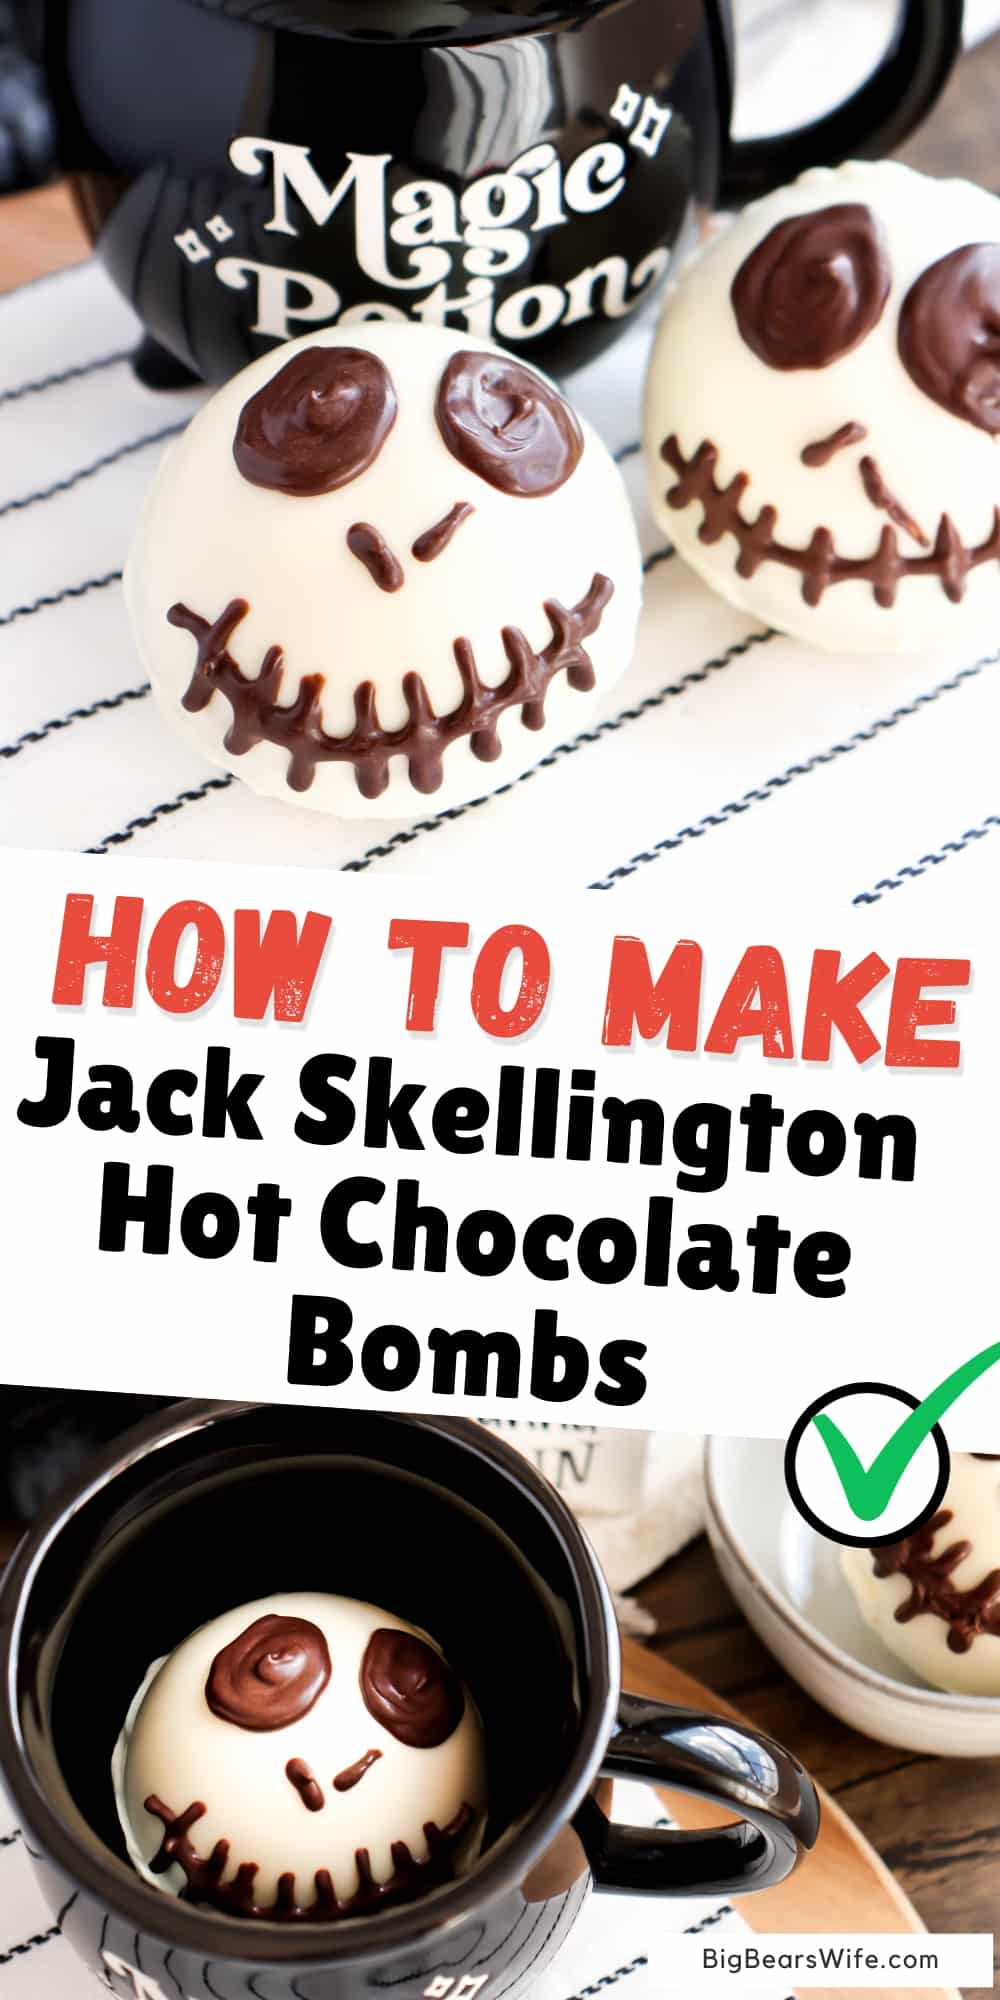 A Nightmare Before Hot Chocolate: Jack Skellington Hot Chocolate Bombs are Here! Step into a whimsical nightmare with Jack Skellington hot chocolate bombs that will send shivers down your spine and warm your soul.  via @bigbearswife